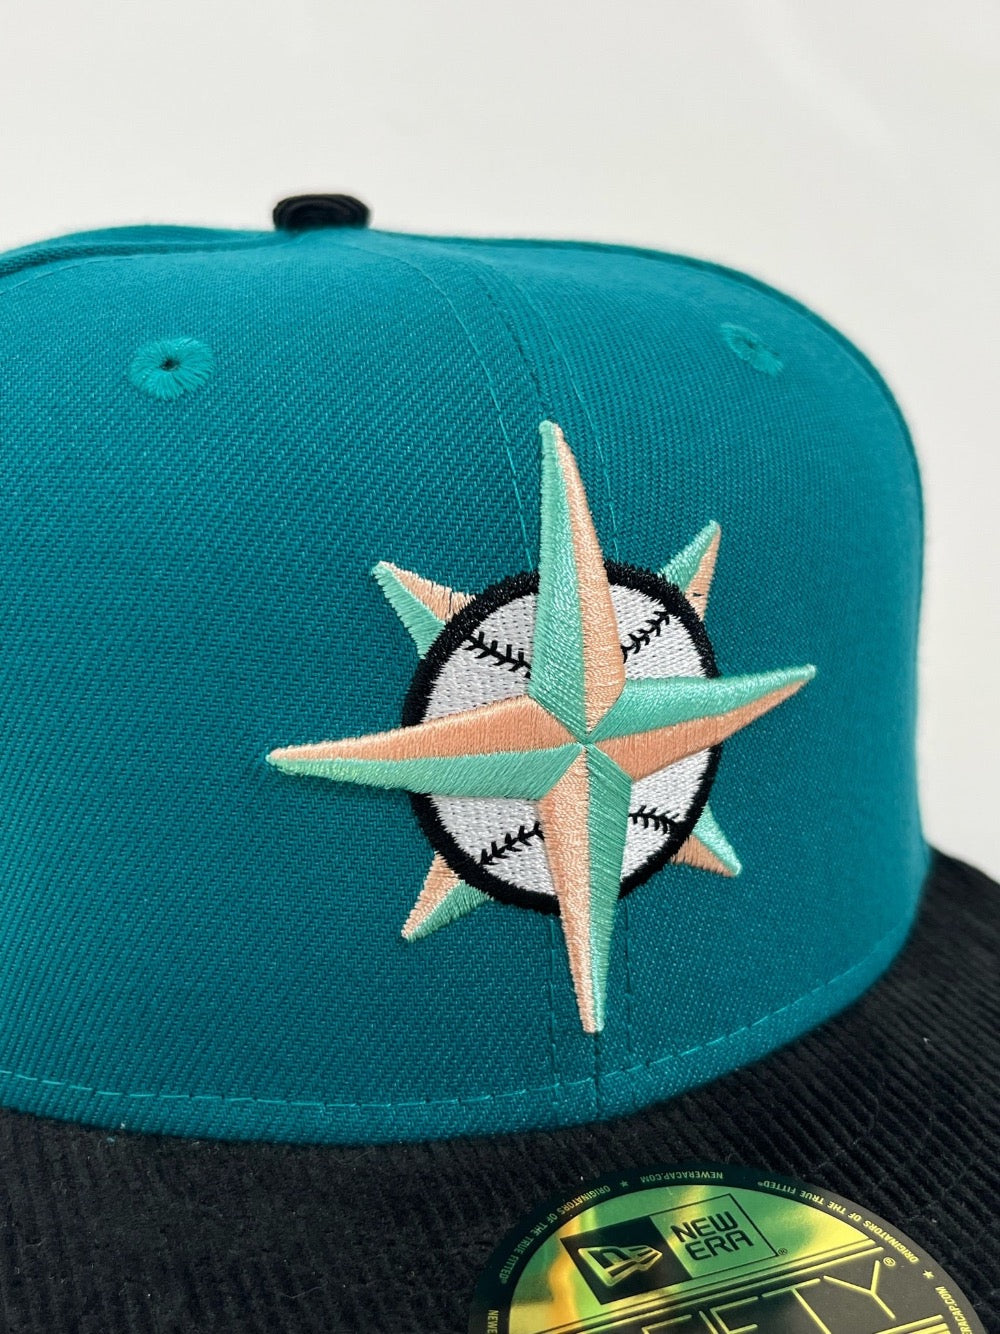 New Era / Hat Stop Exclusive Teal Seattle Mariners 